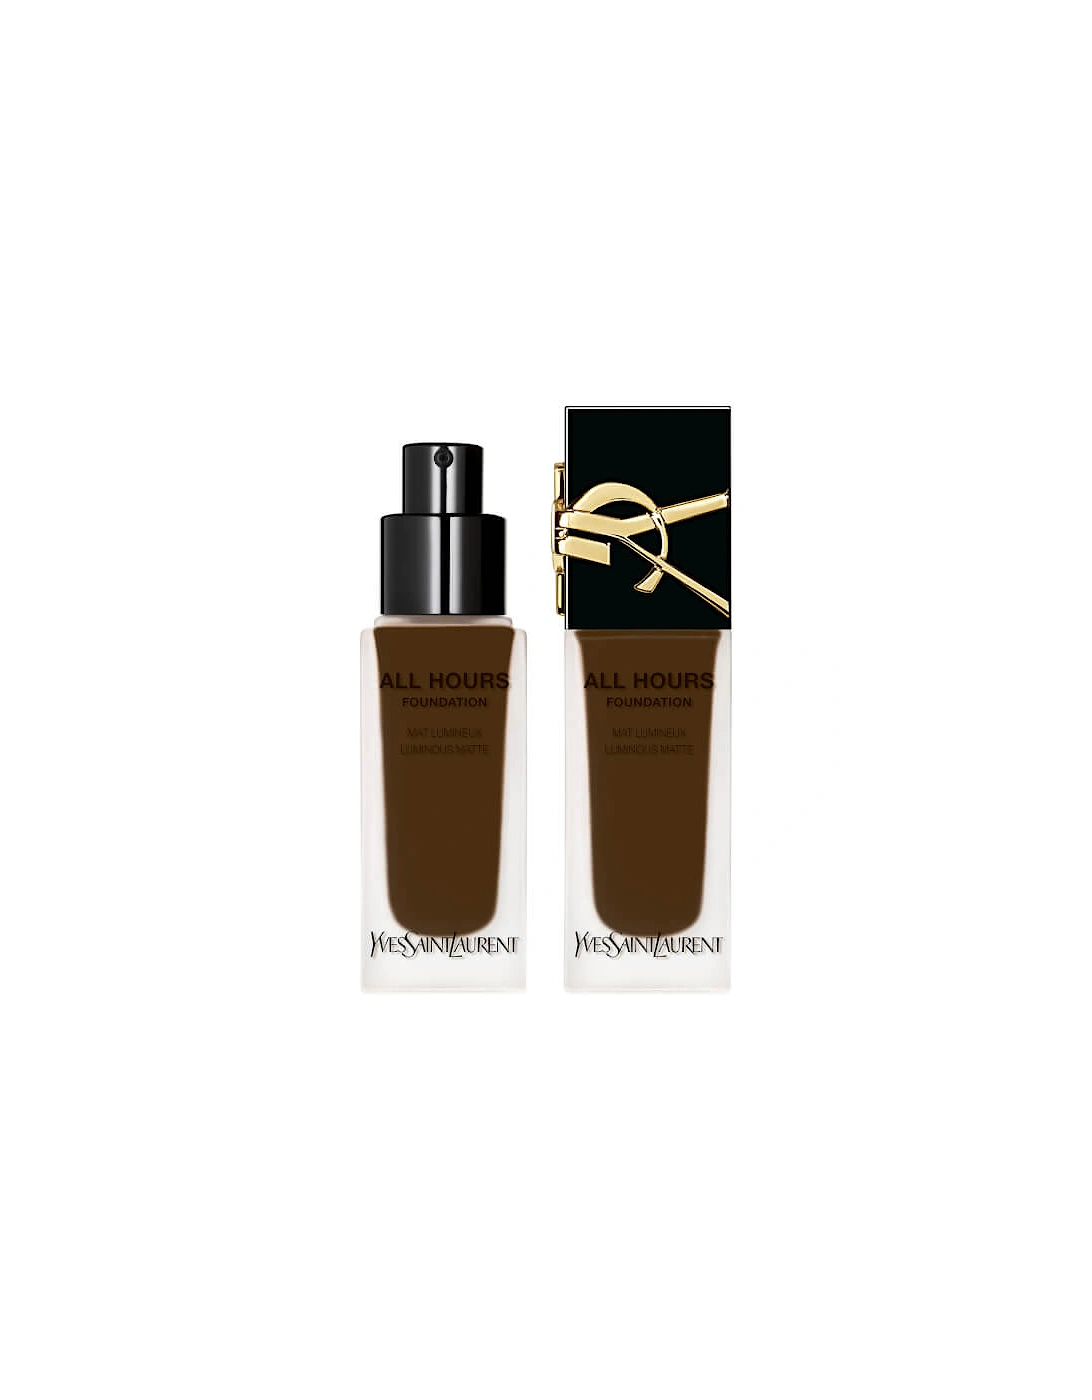 Yves Saint Laurent All Hours Luminous Matte Foundation with SPF 39 - DC7